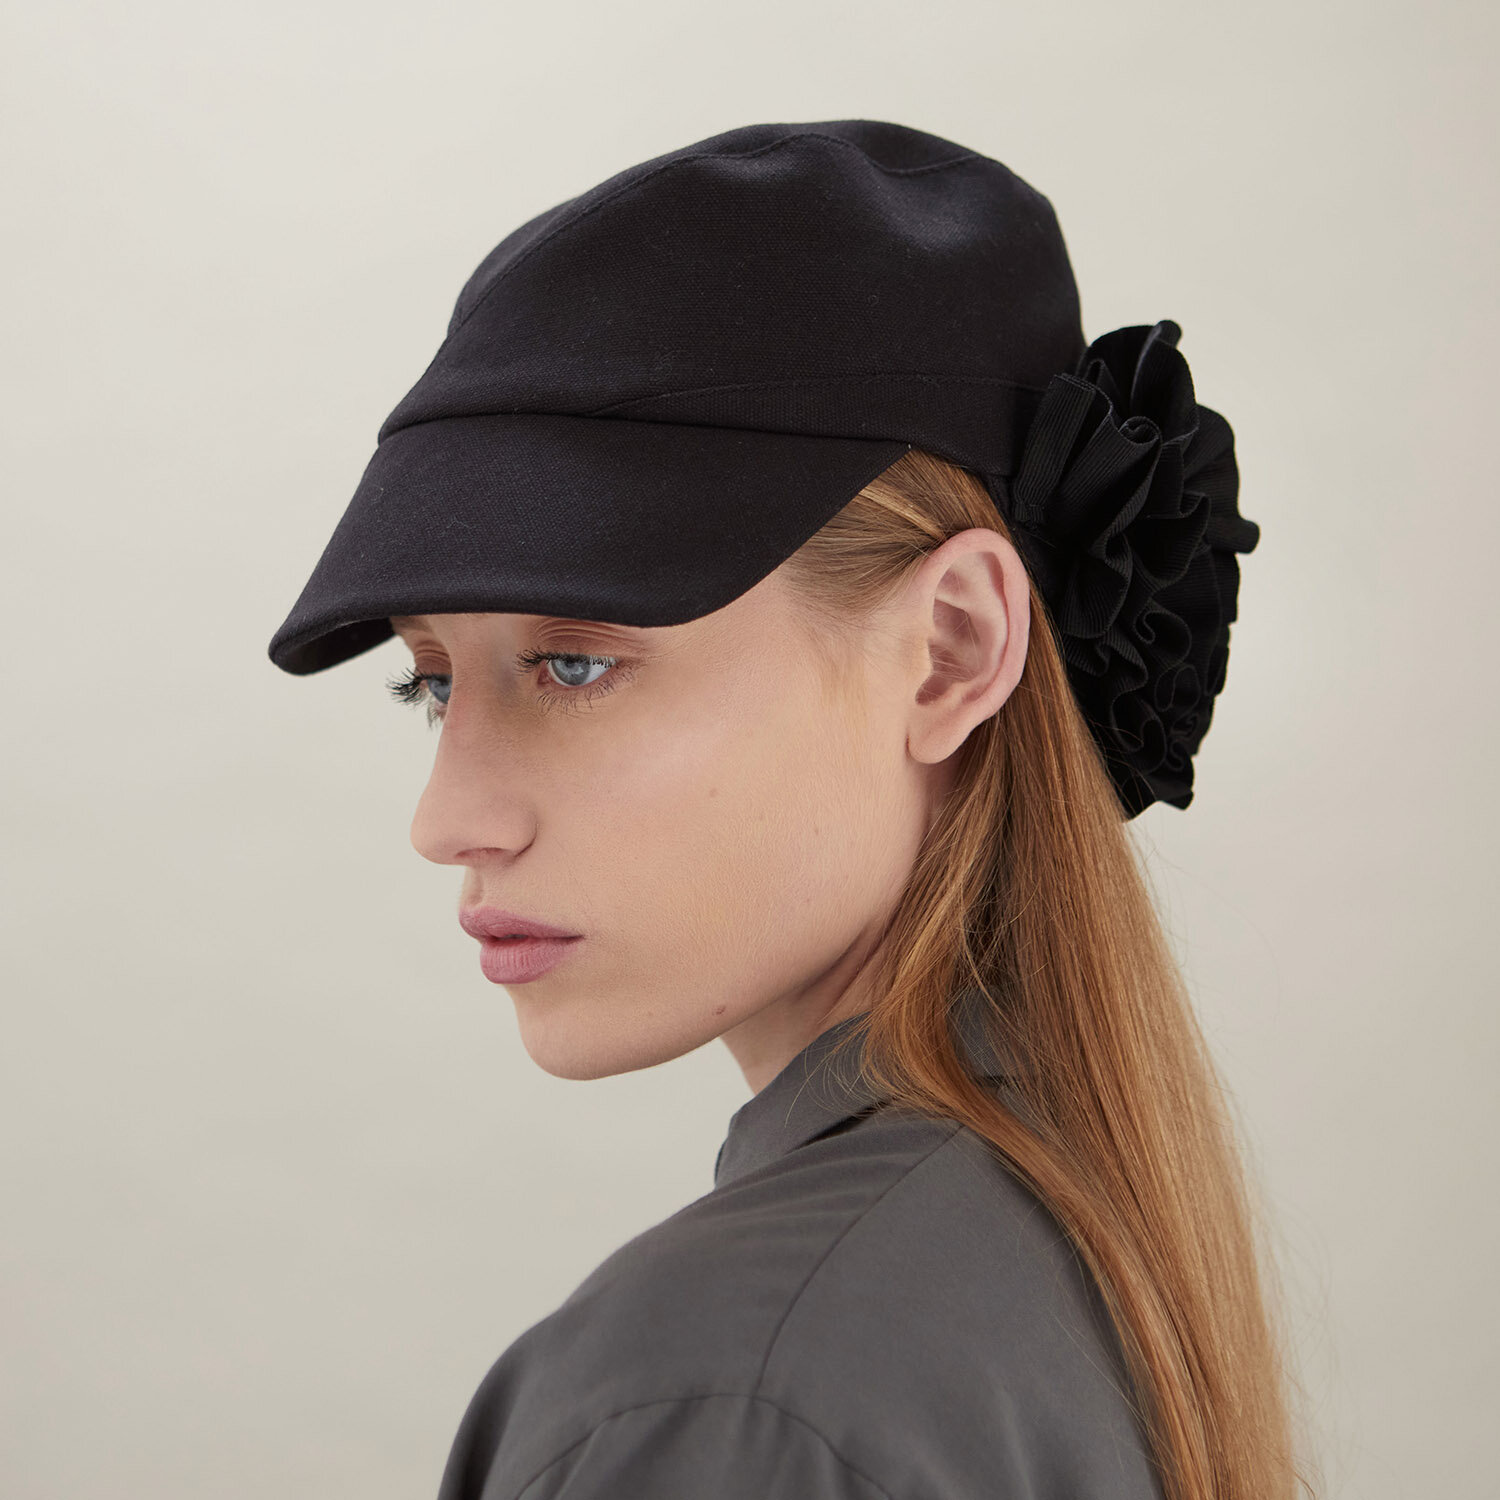   ‘Celeste’ peaked cap with ribboning detail.   Photo by James Champion 